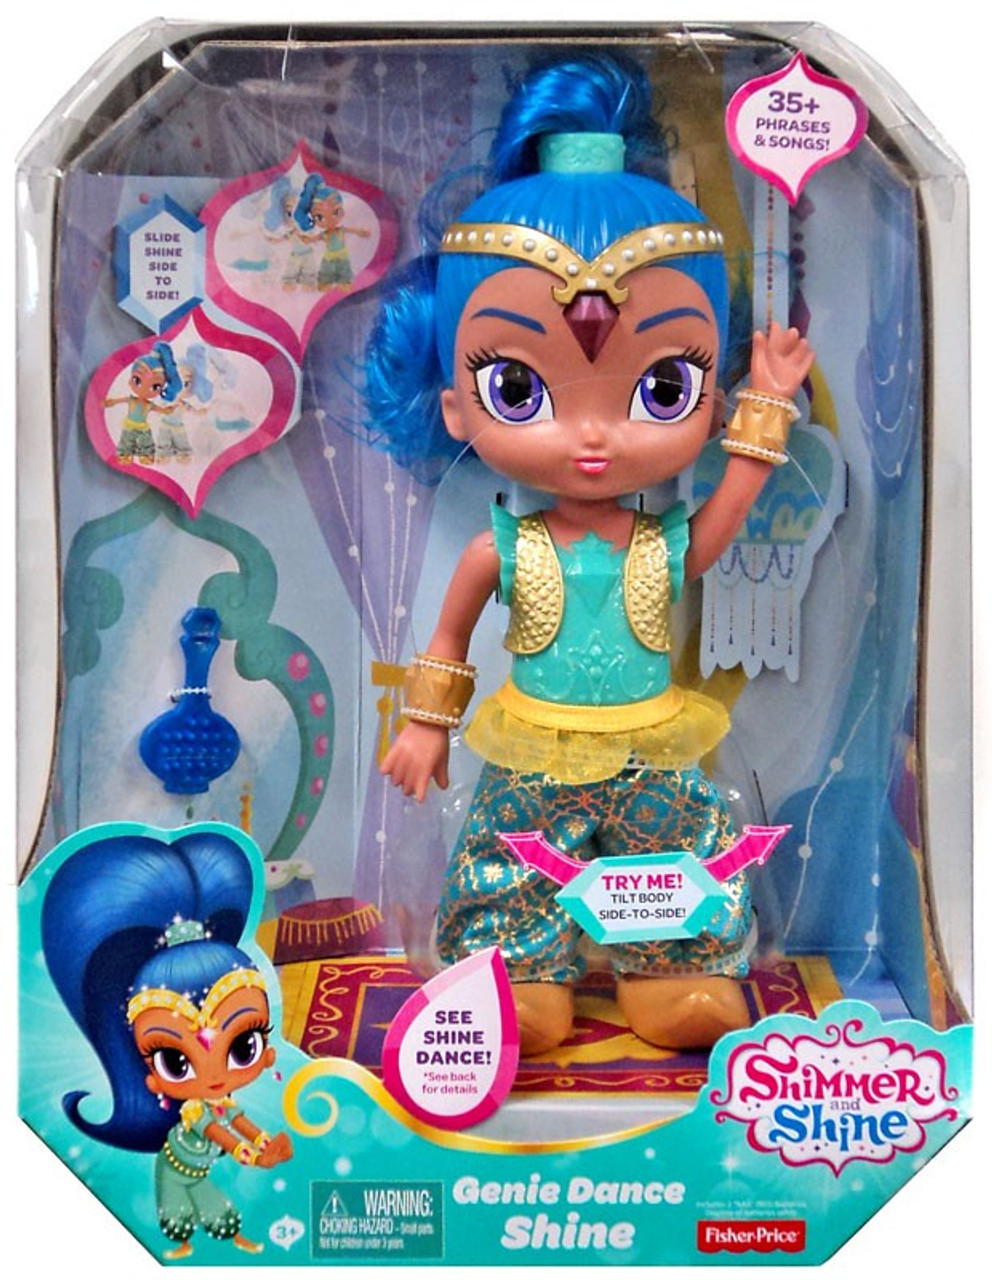 dancing shimmer and shine doll